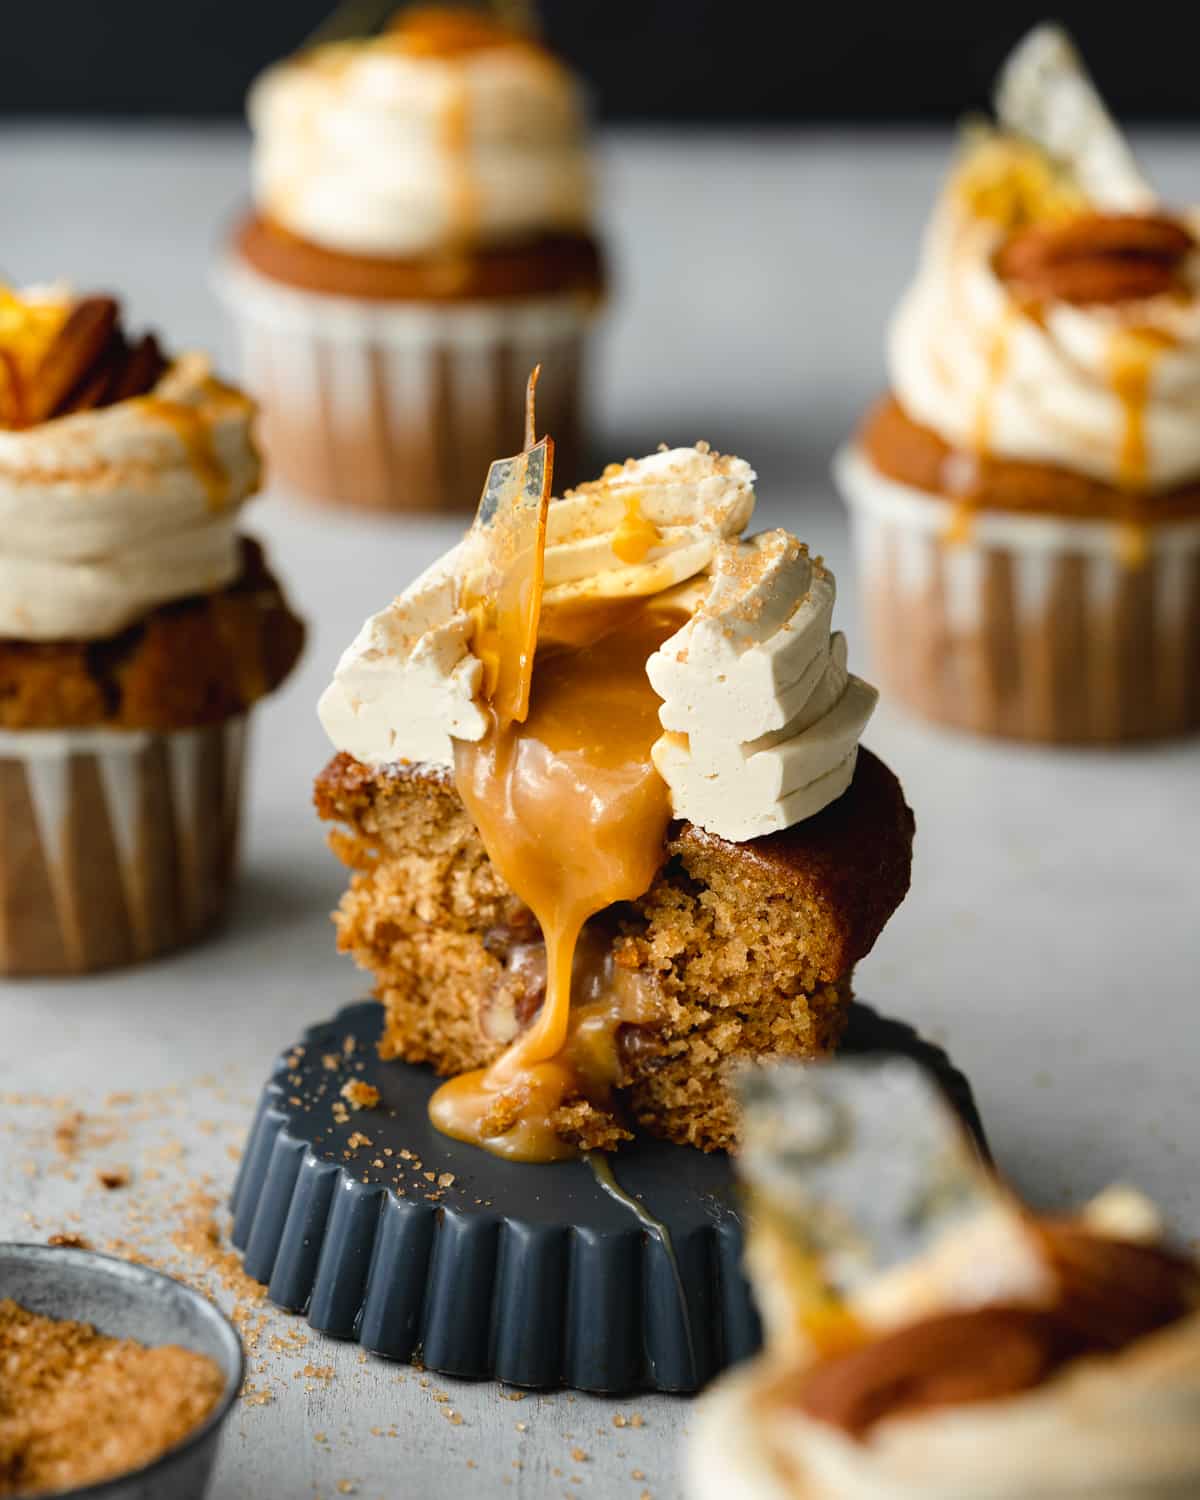 cupcake filled with caramel sauce with buttercream on top.